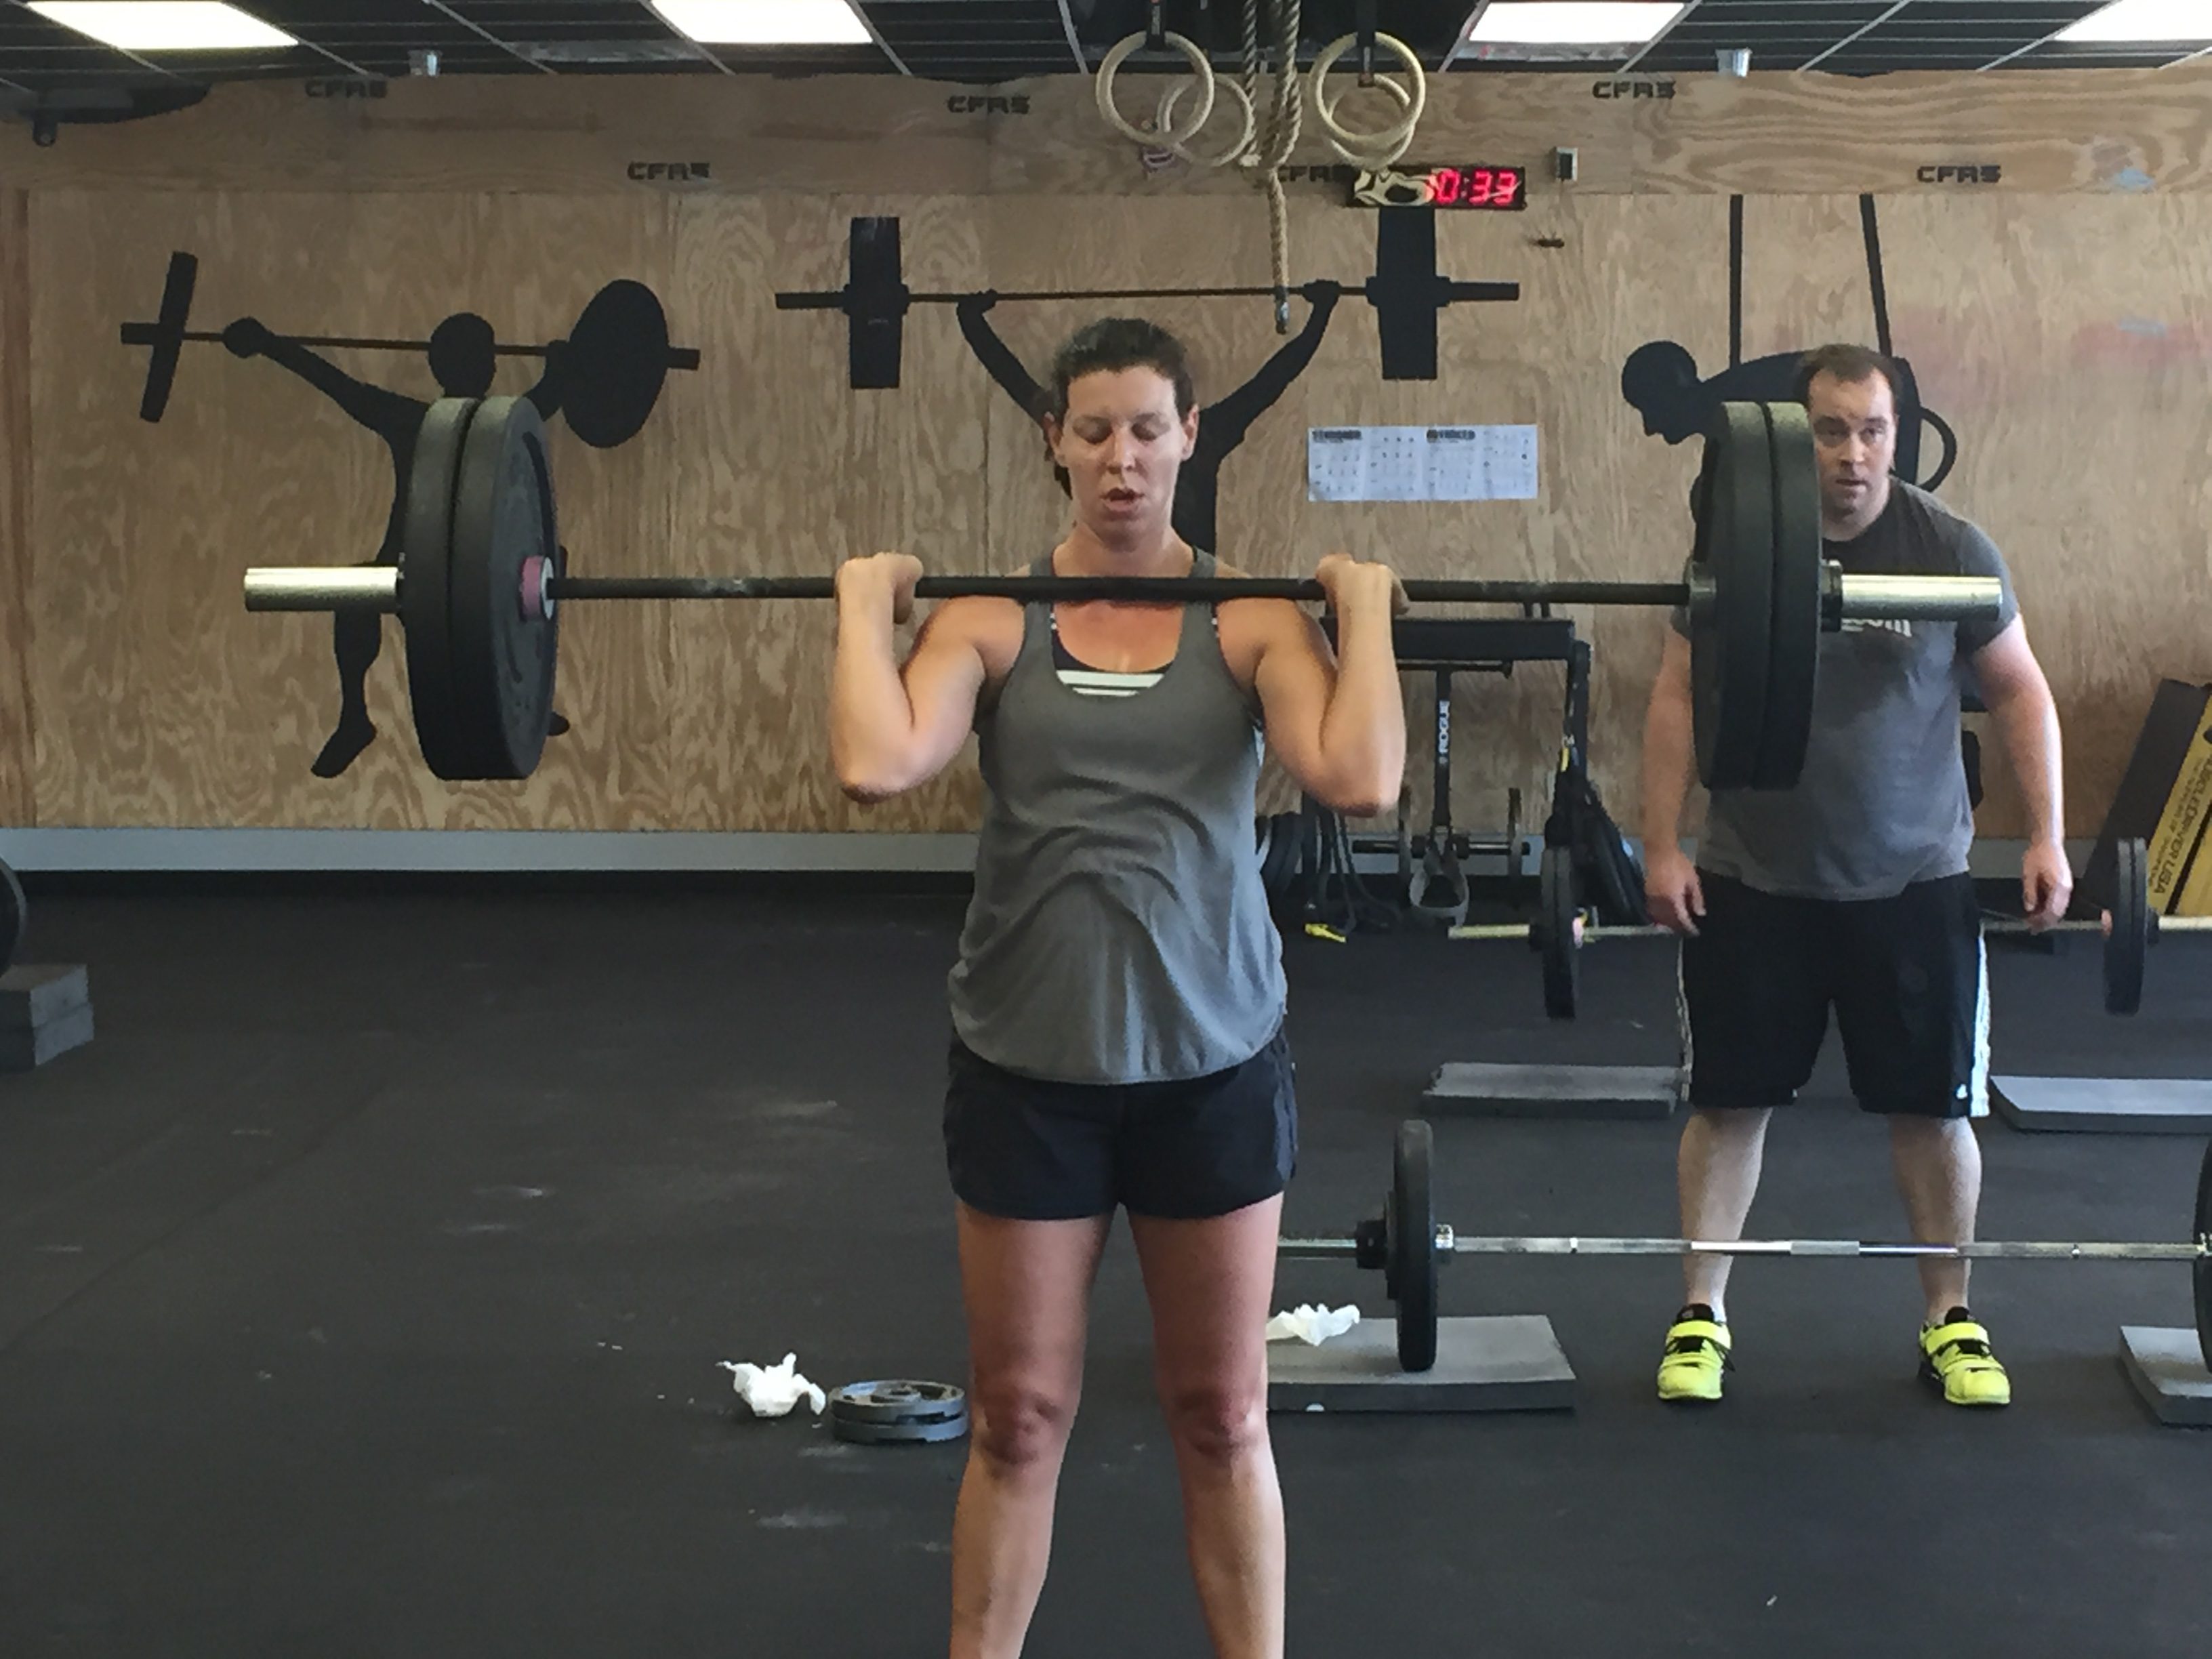 Tuesday 7.28.15 Competitor WOD